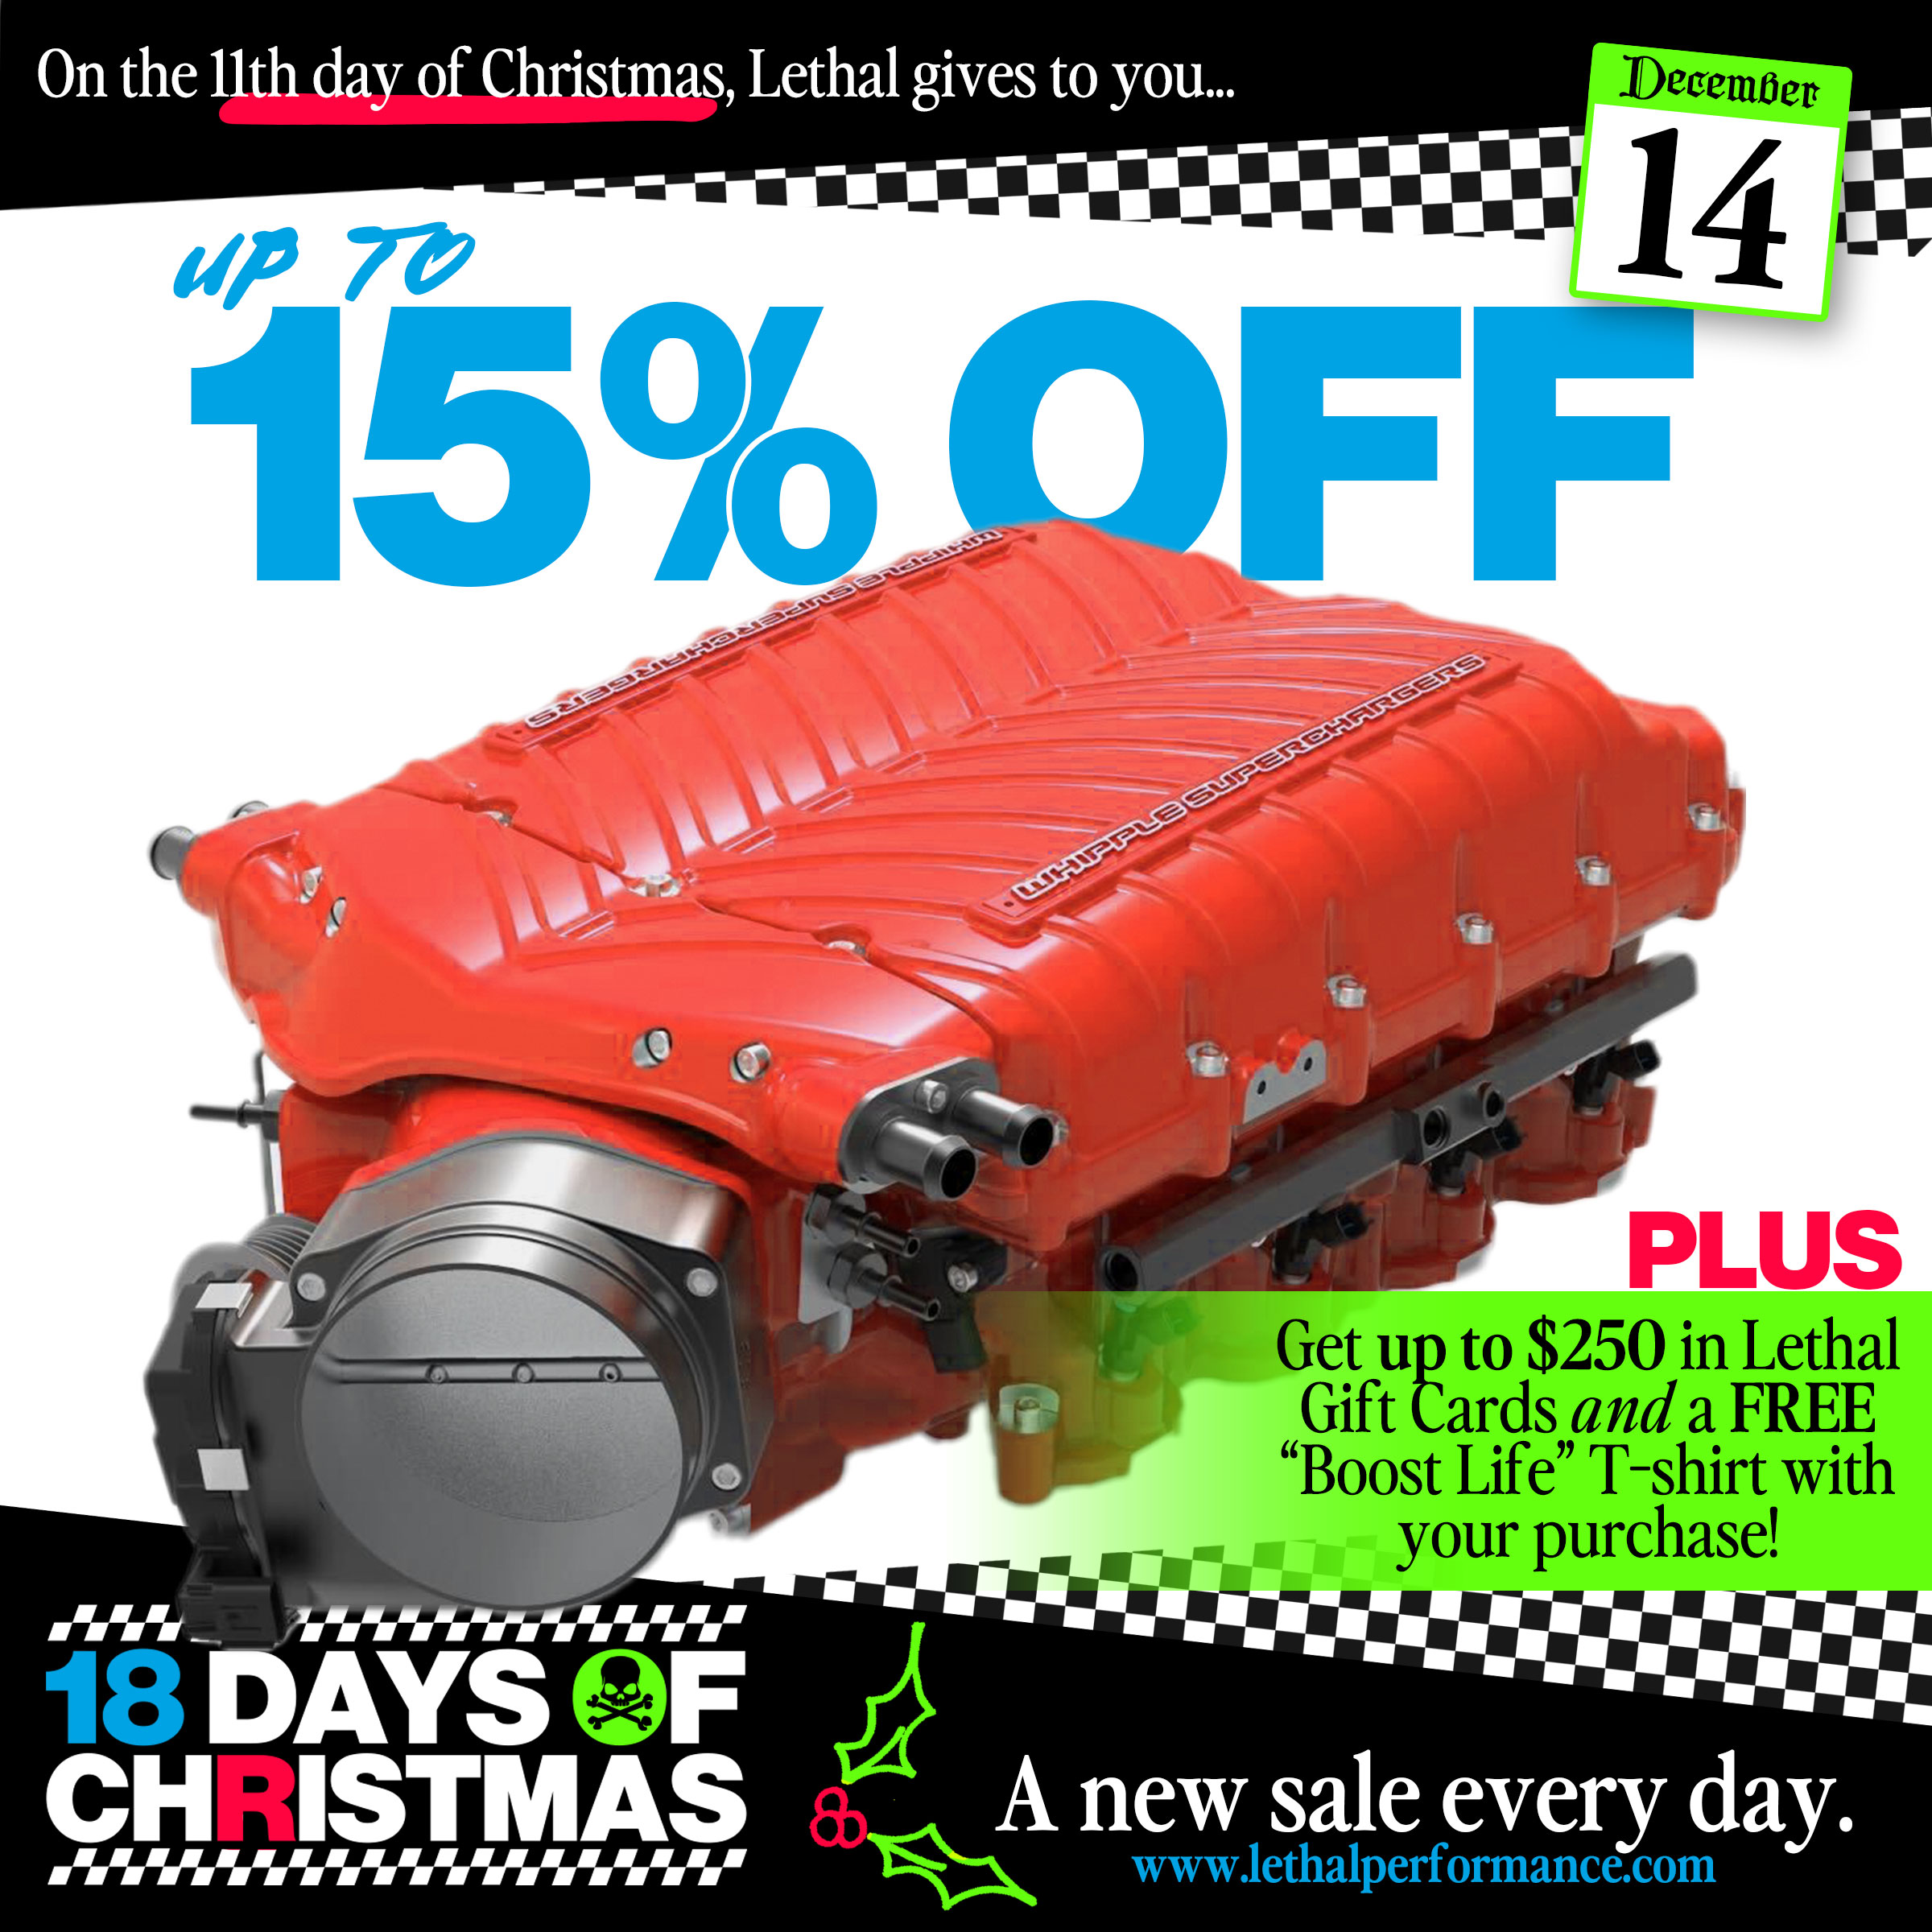 S650 Mustang Lethal Perfomance's 18 Days of Christmas SALES START NOW!! Whipple_Supercharger